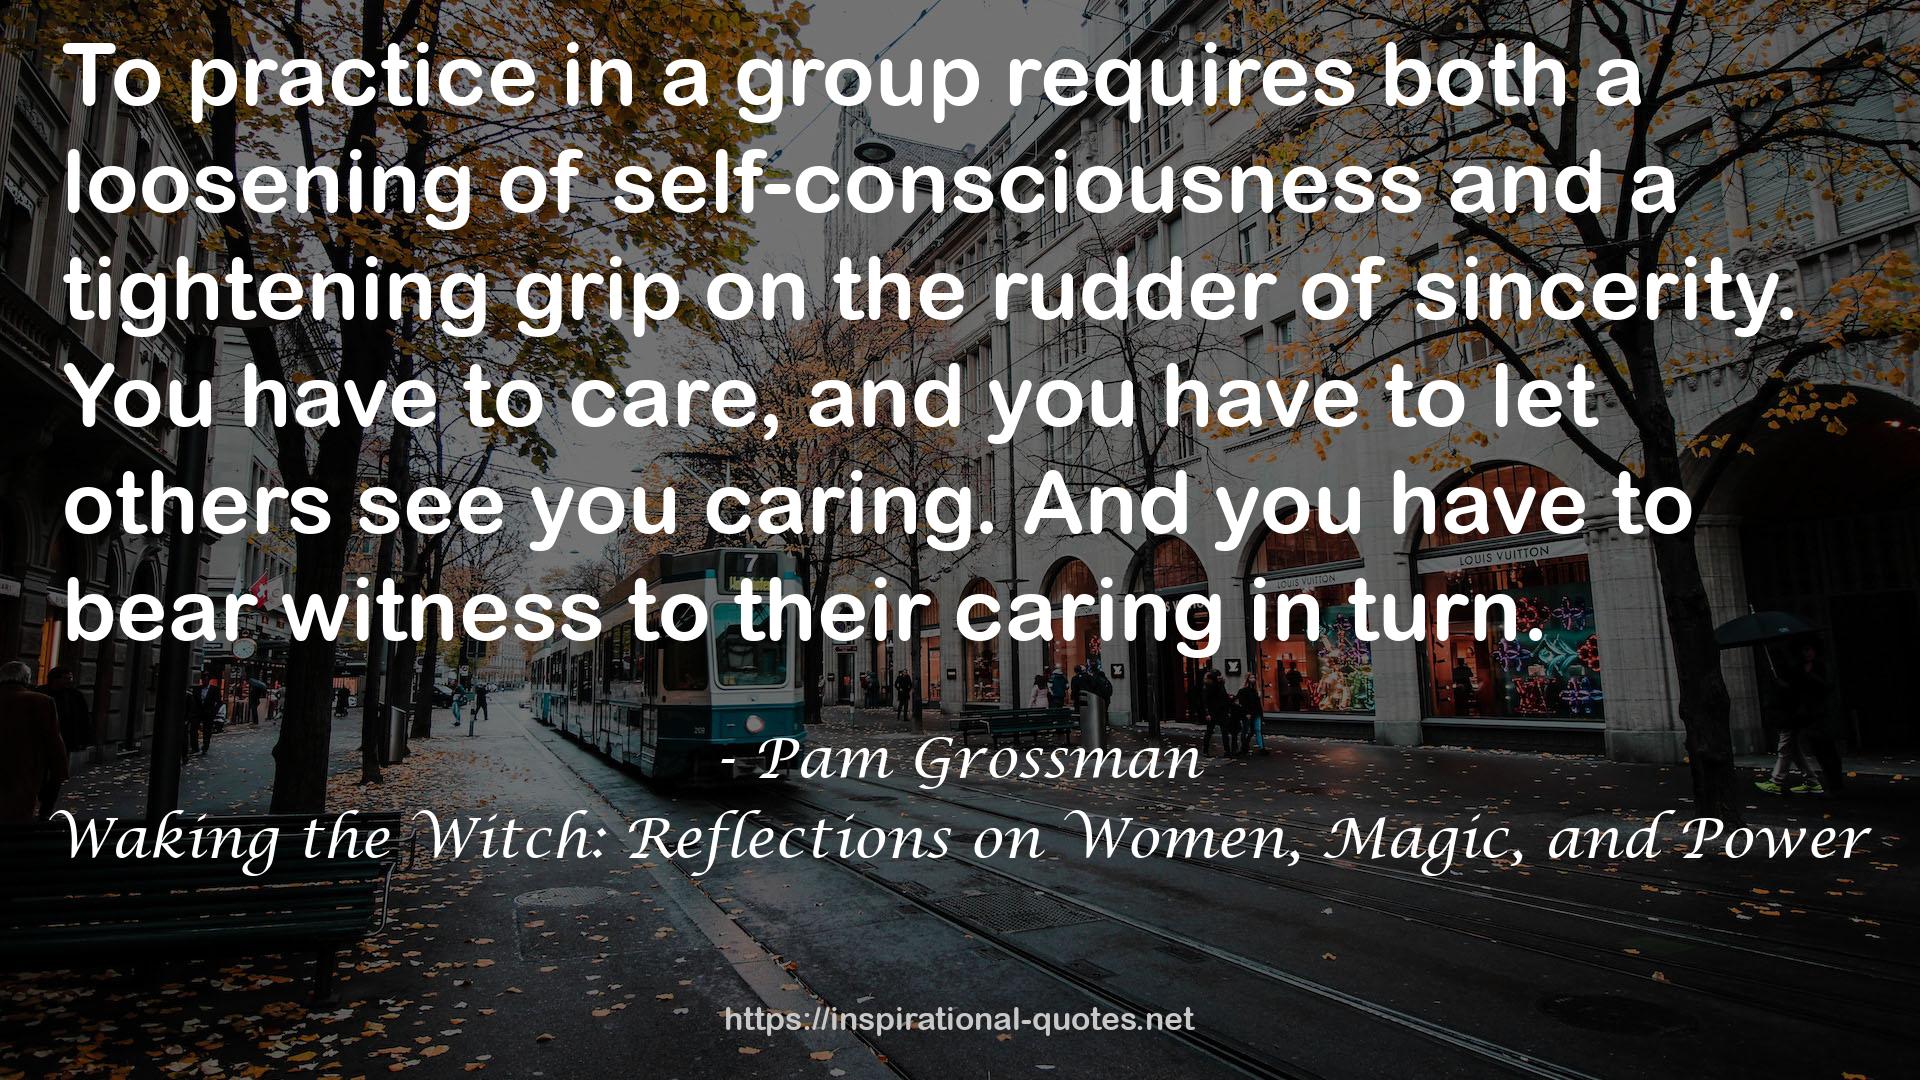 Waking the Witch: Reflections on Women, Magic, and Power QUOTES